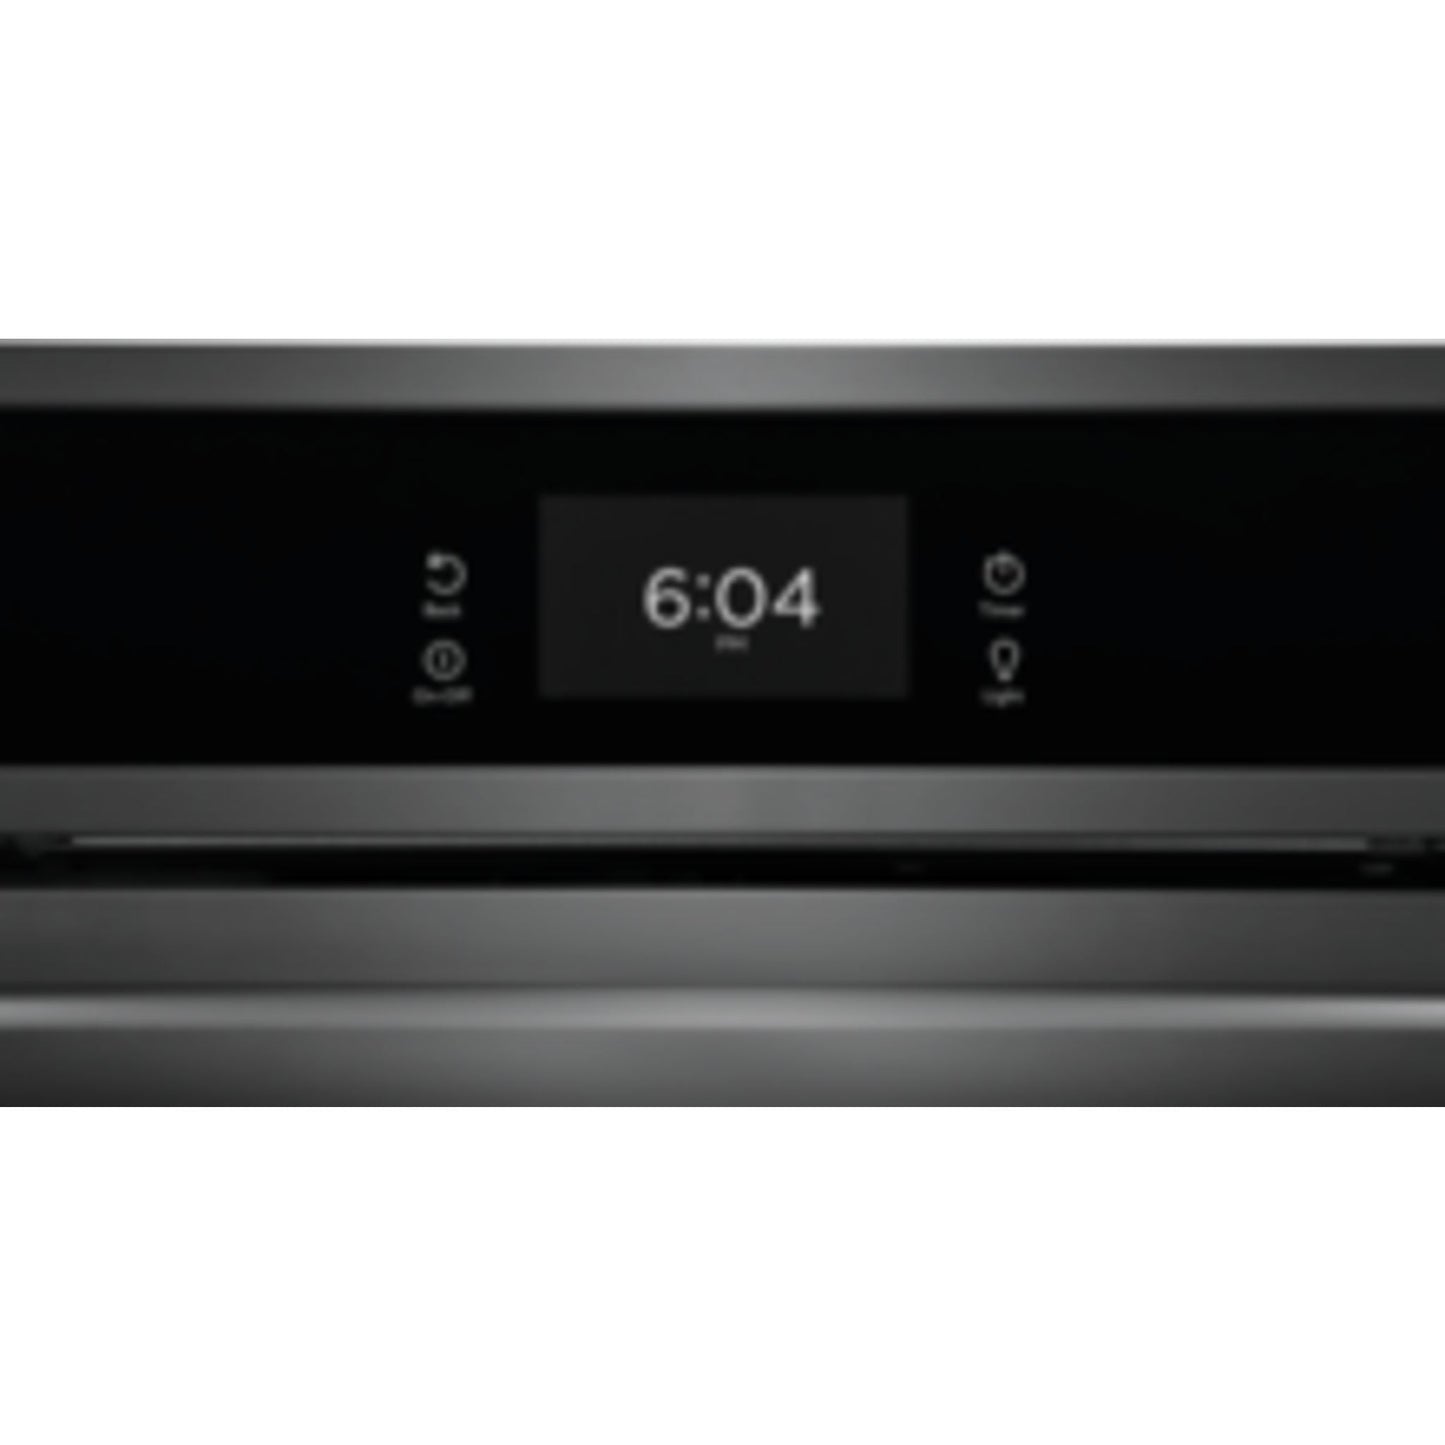 Frigidaire Gallery 30" Microwave/Wall Oven (GCWM3067AD) - Black Stainless, SmudgeProof